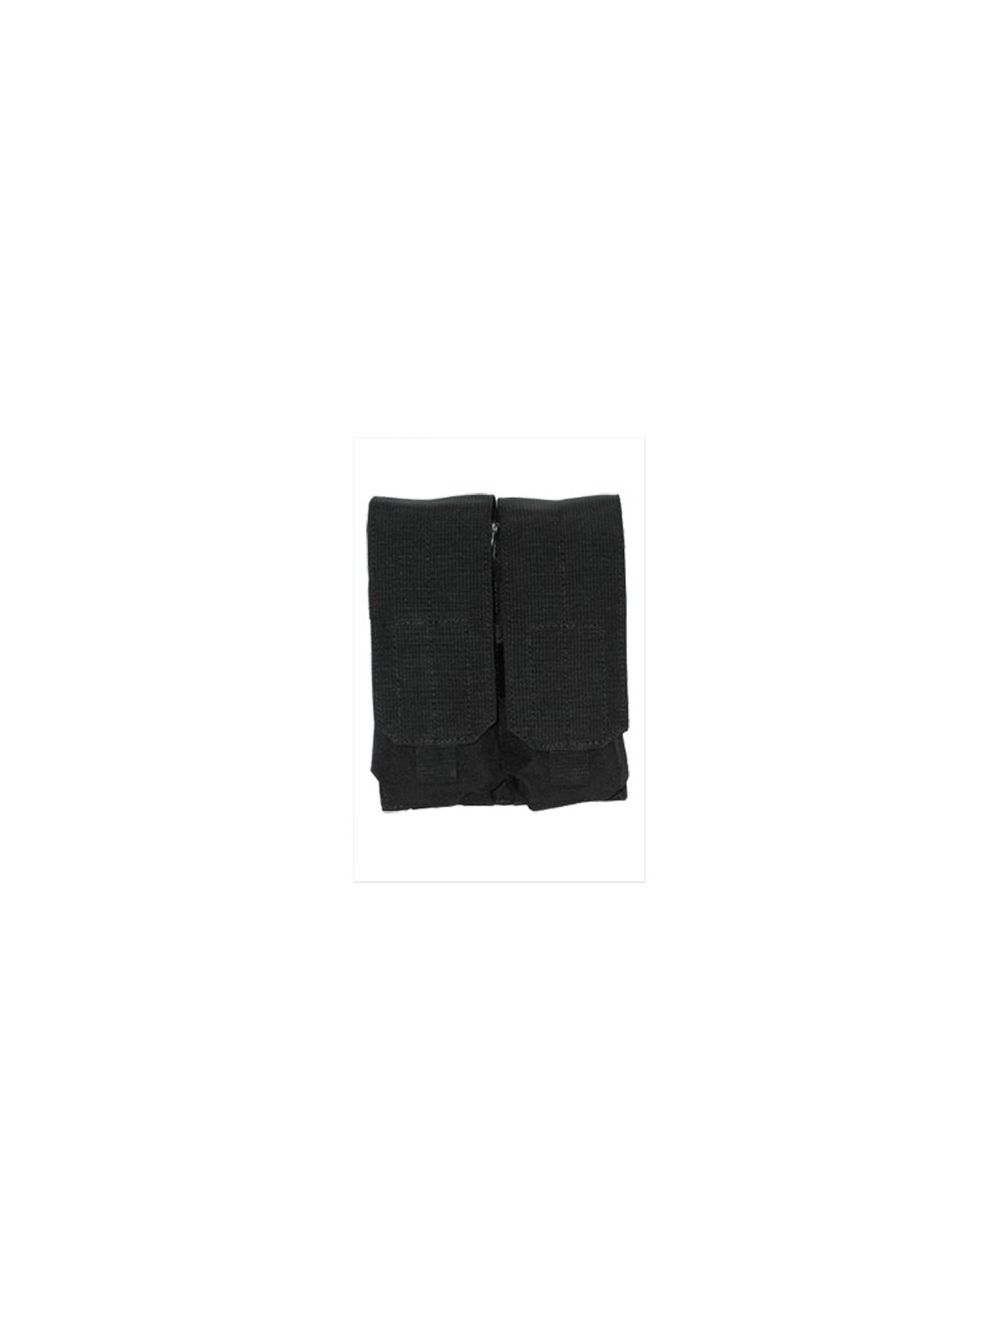 M4/M16 Double Mag Pouch